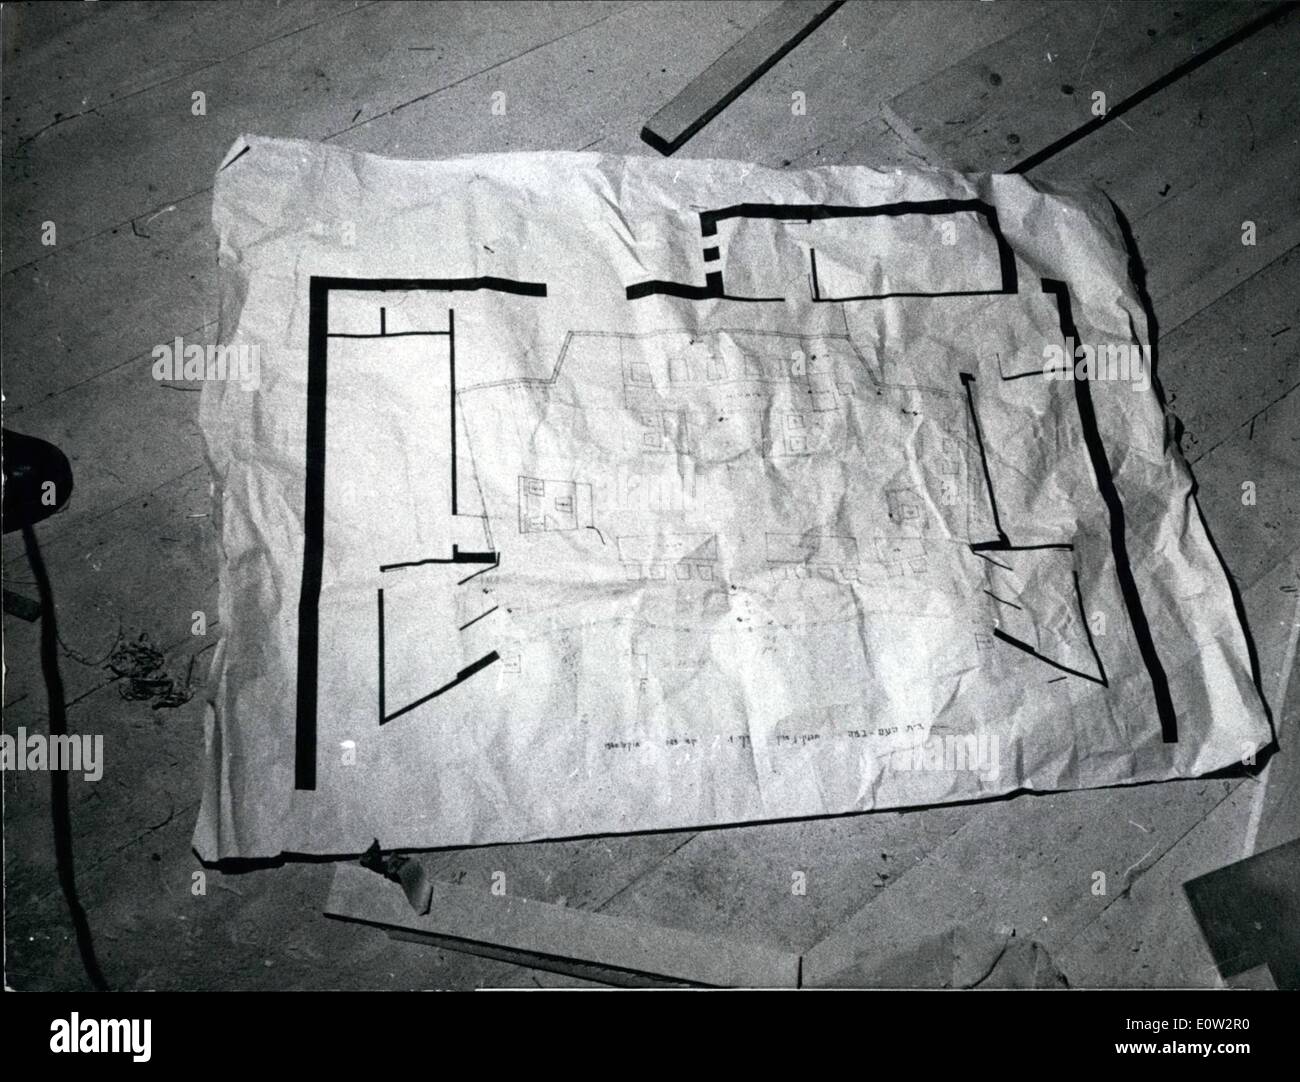 Feb. 02, 1961 - Preview of trial against Adolf Eichmann in Jerusalem. Photo shows The architects plans of the court room in the Stock Photo